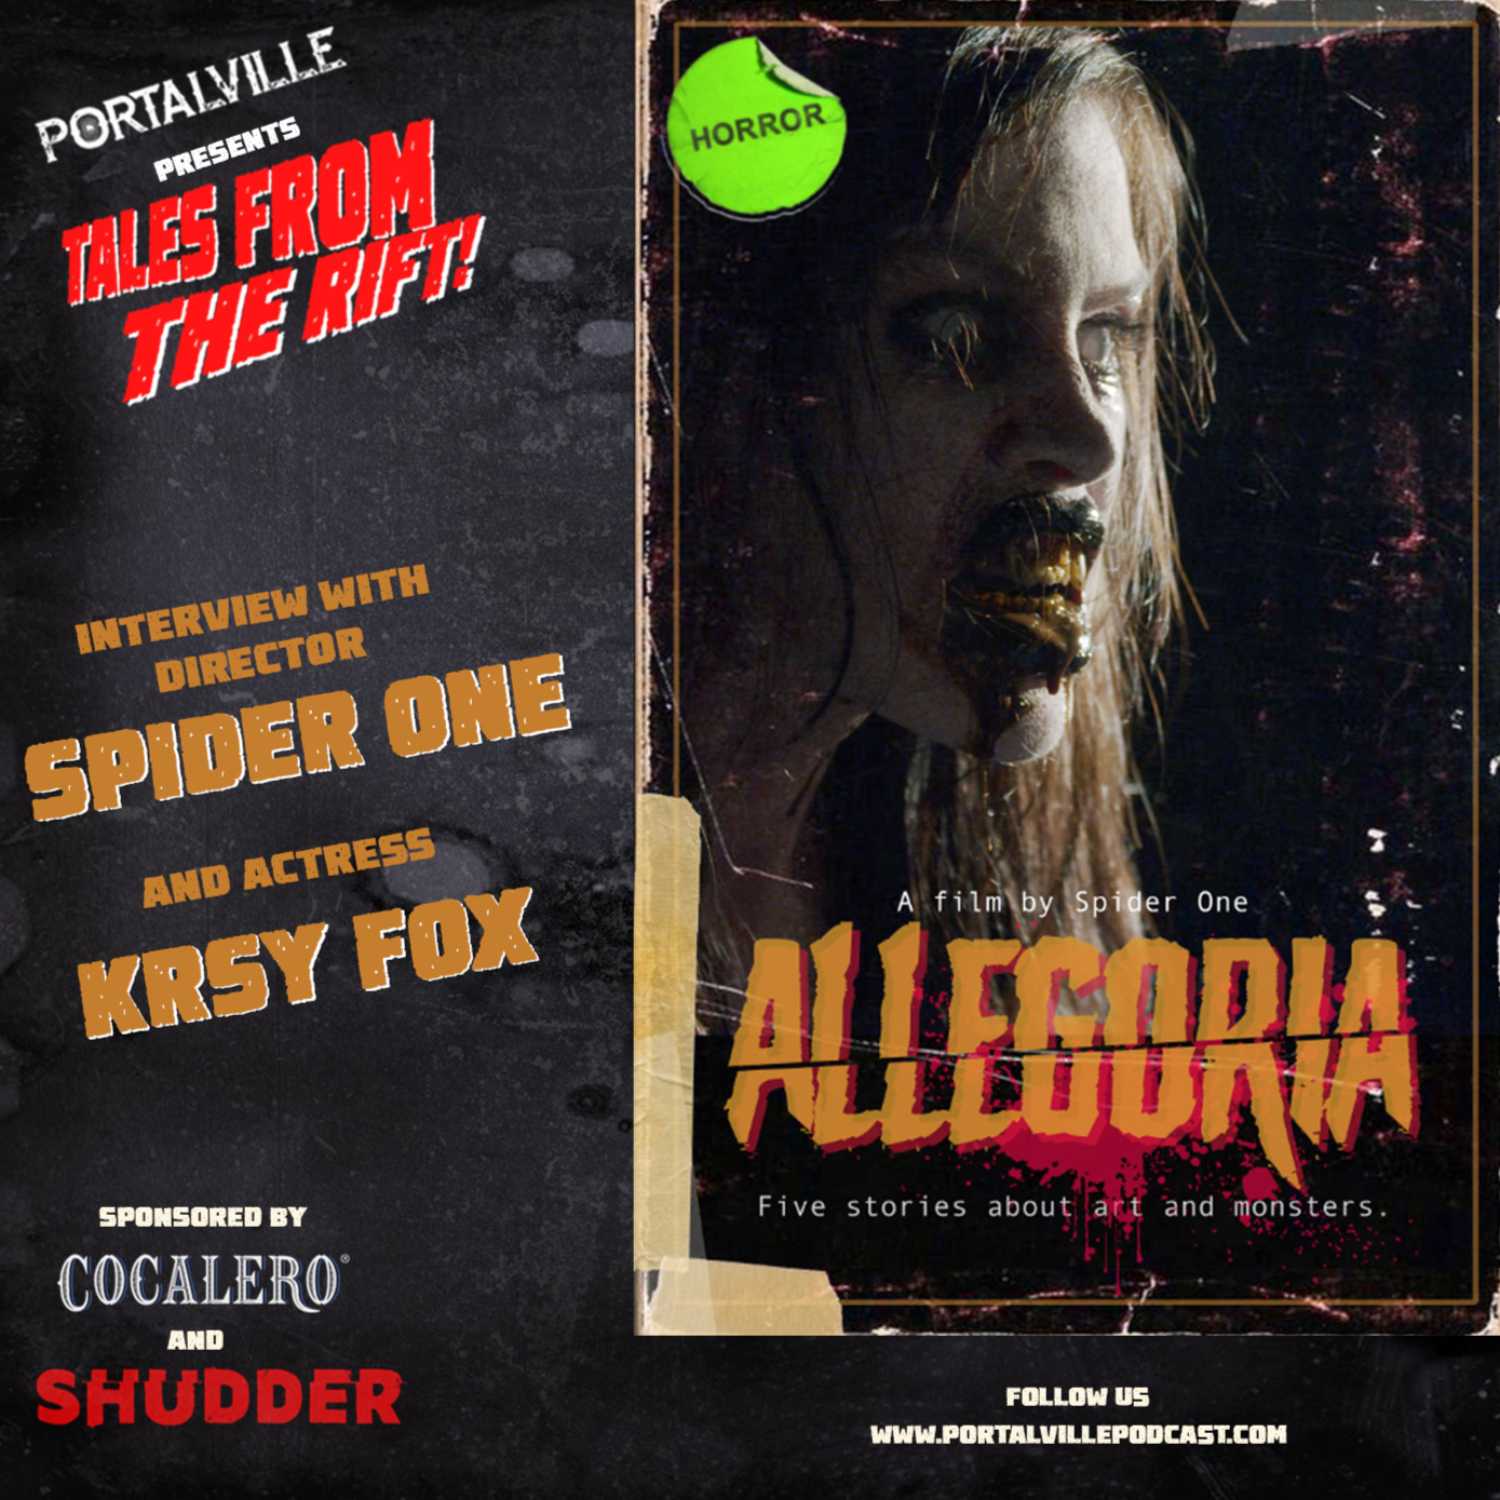 Allegoria - Interview with Spider One and Krsy Fox Image